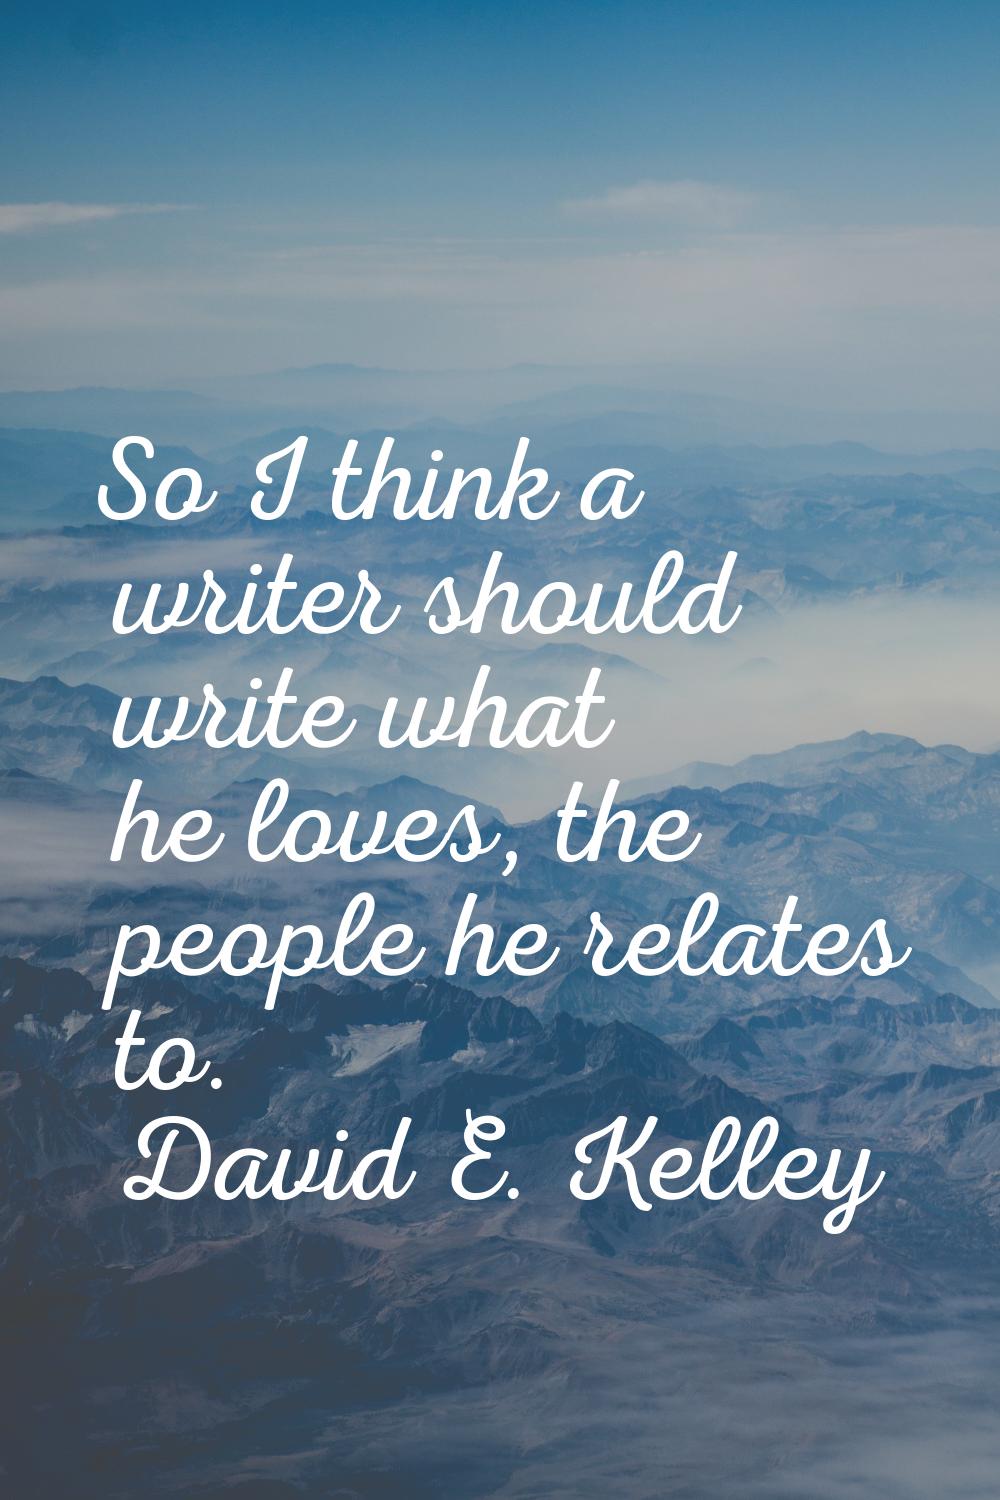 So I think a writer should write what he loves, the people he relates to.